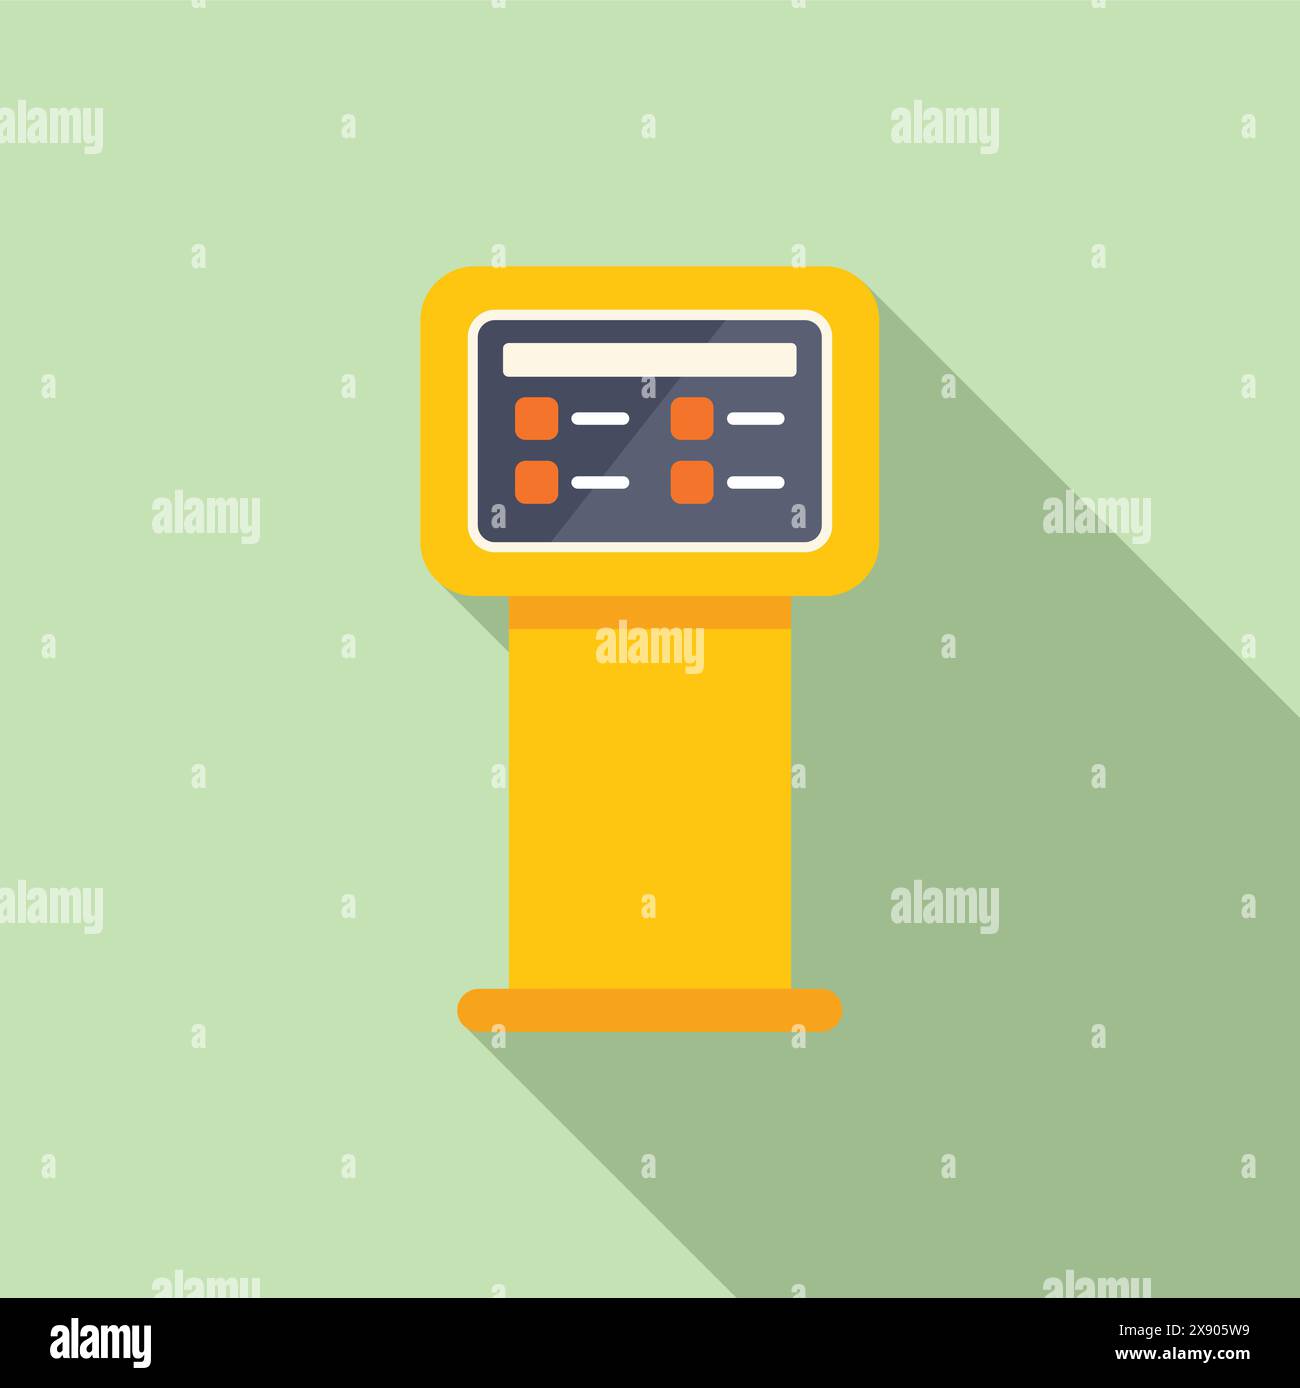 Vector illustration of a modern ticket vending machine icon with a flat design on a pastel background Stock Vector